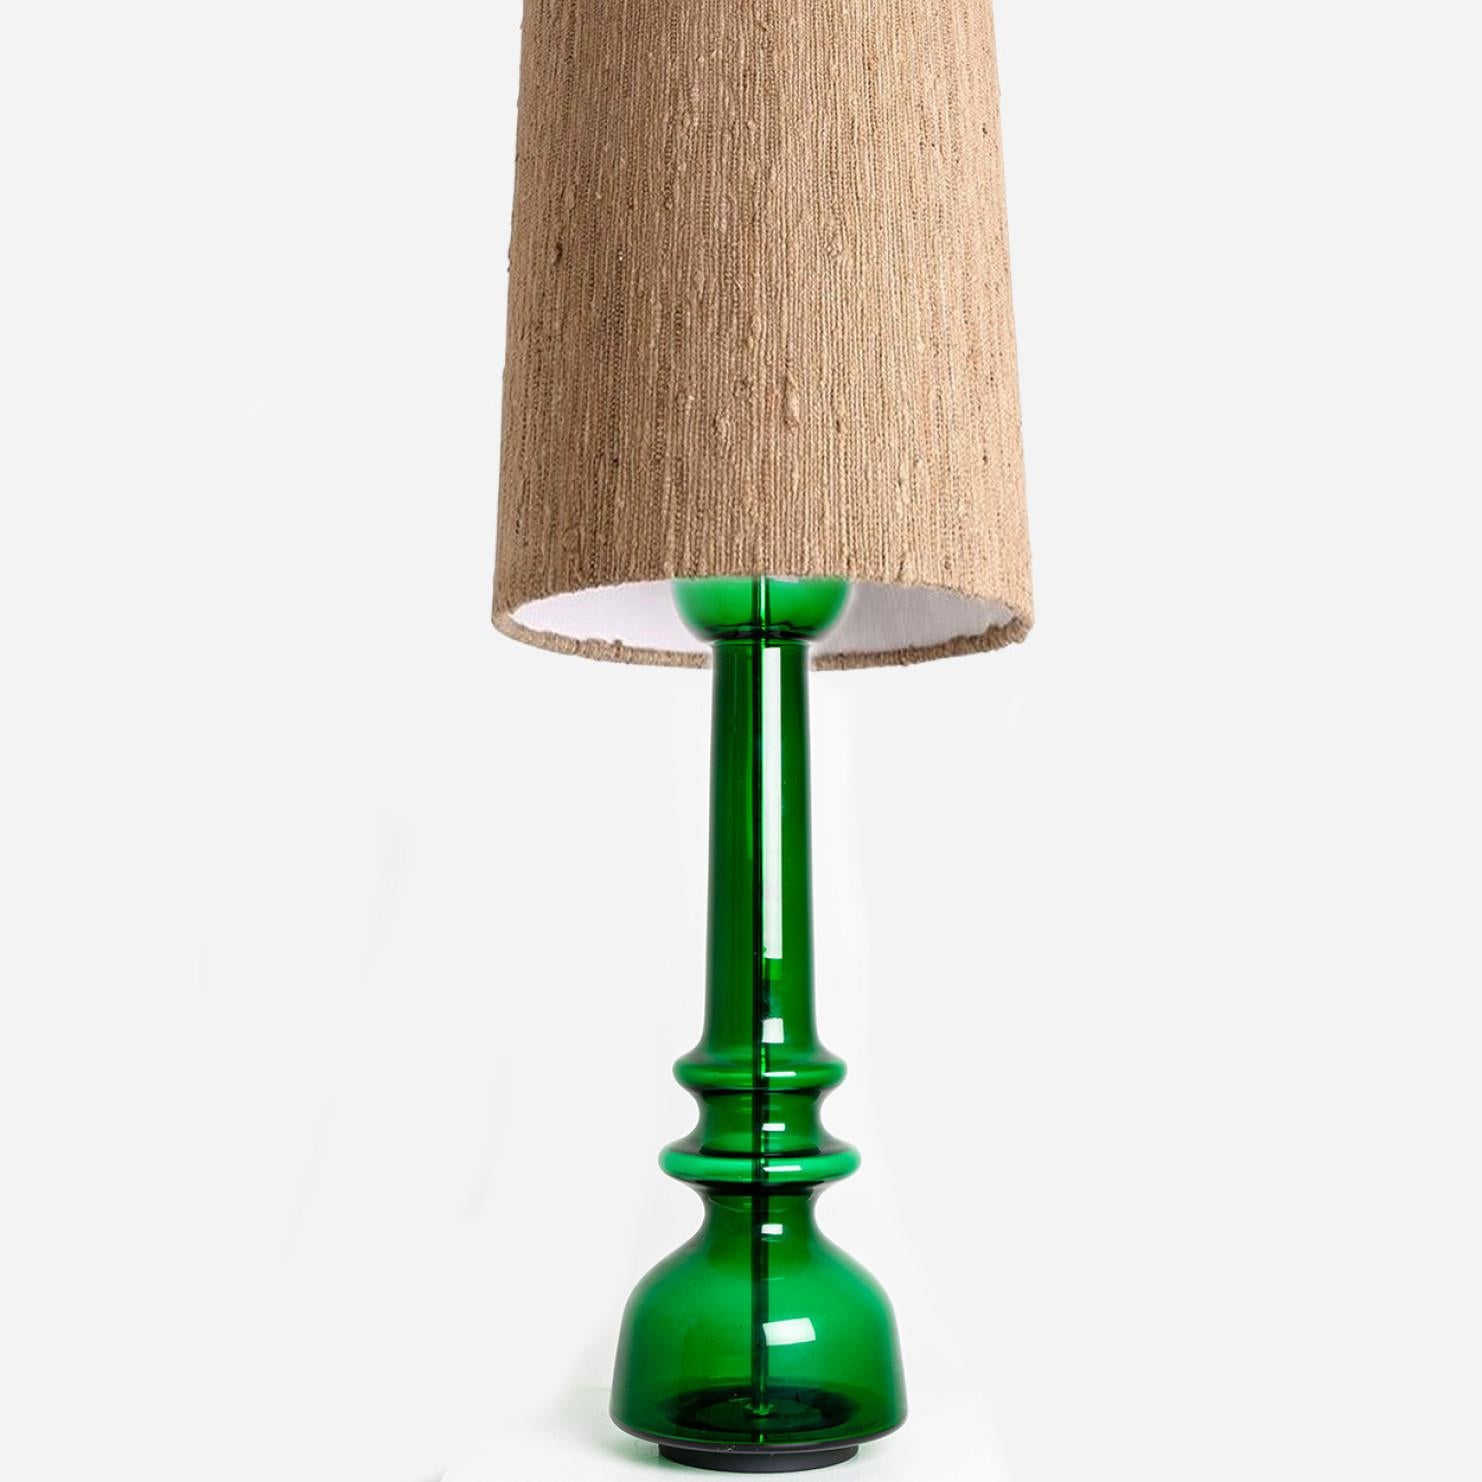 20th Century Green Glass Table Lamp With Handmade Shade by Doria Leuchten Germany For Sale